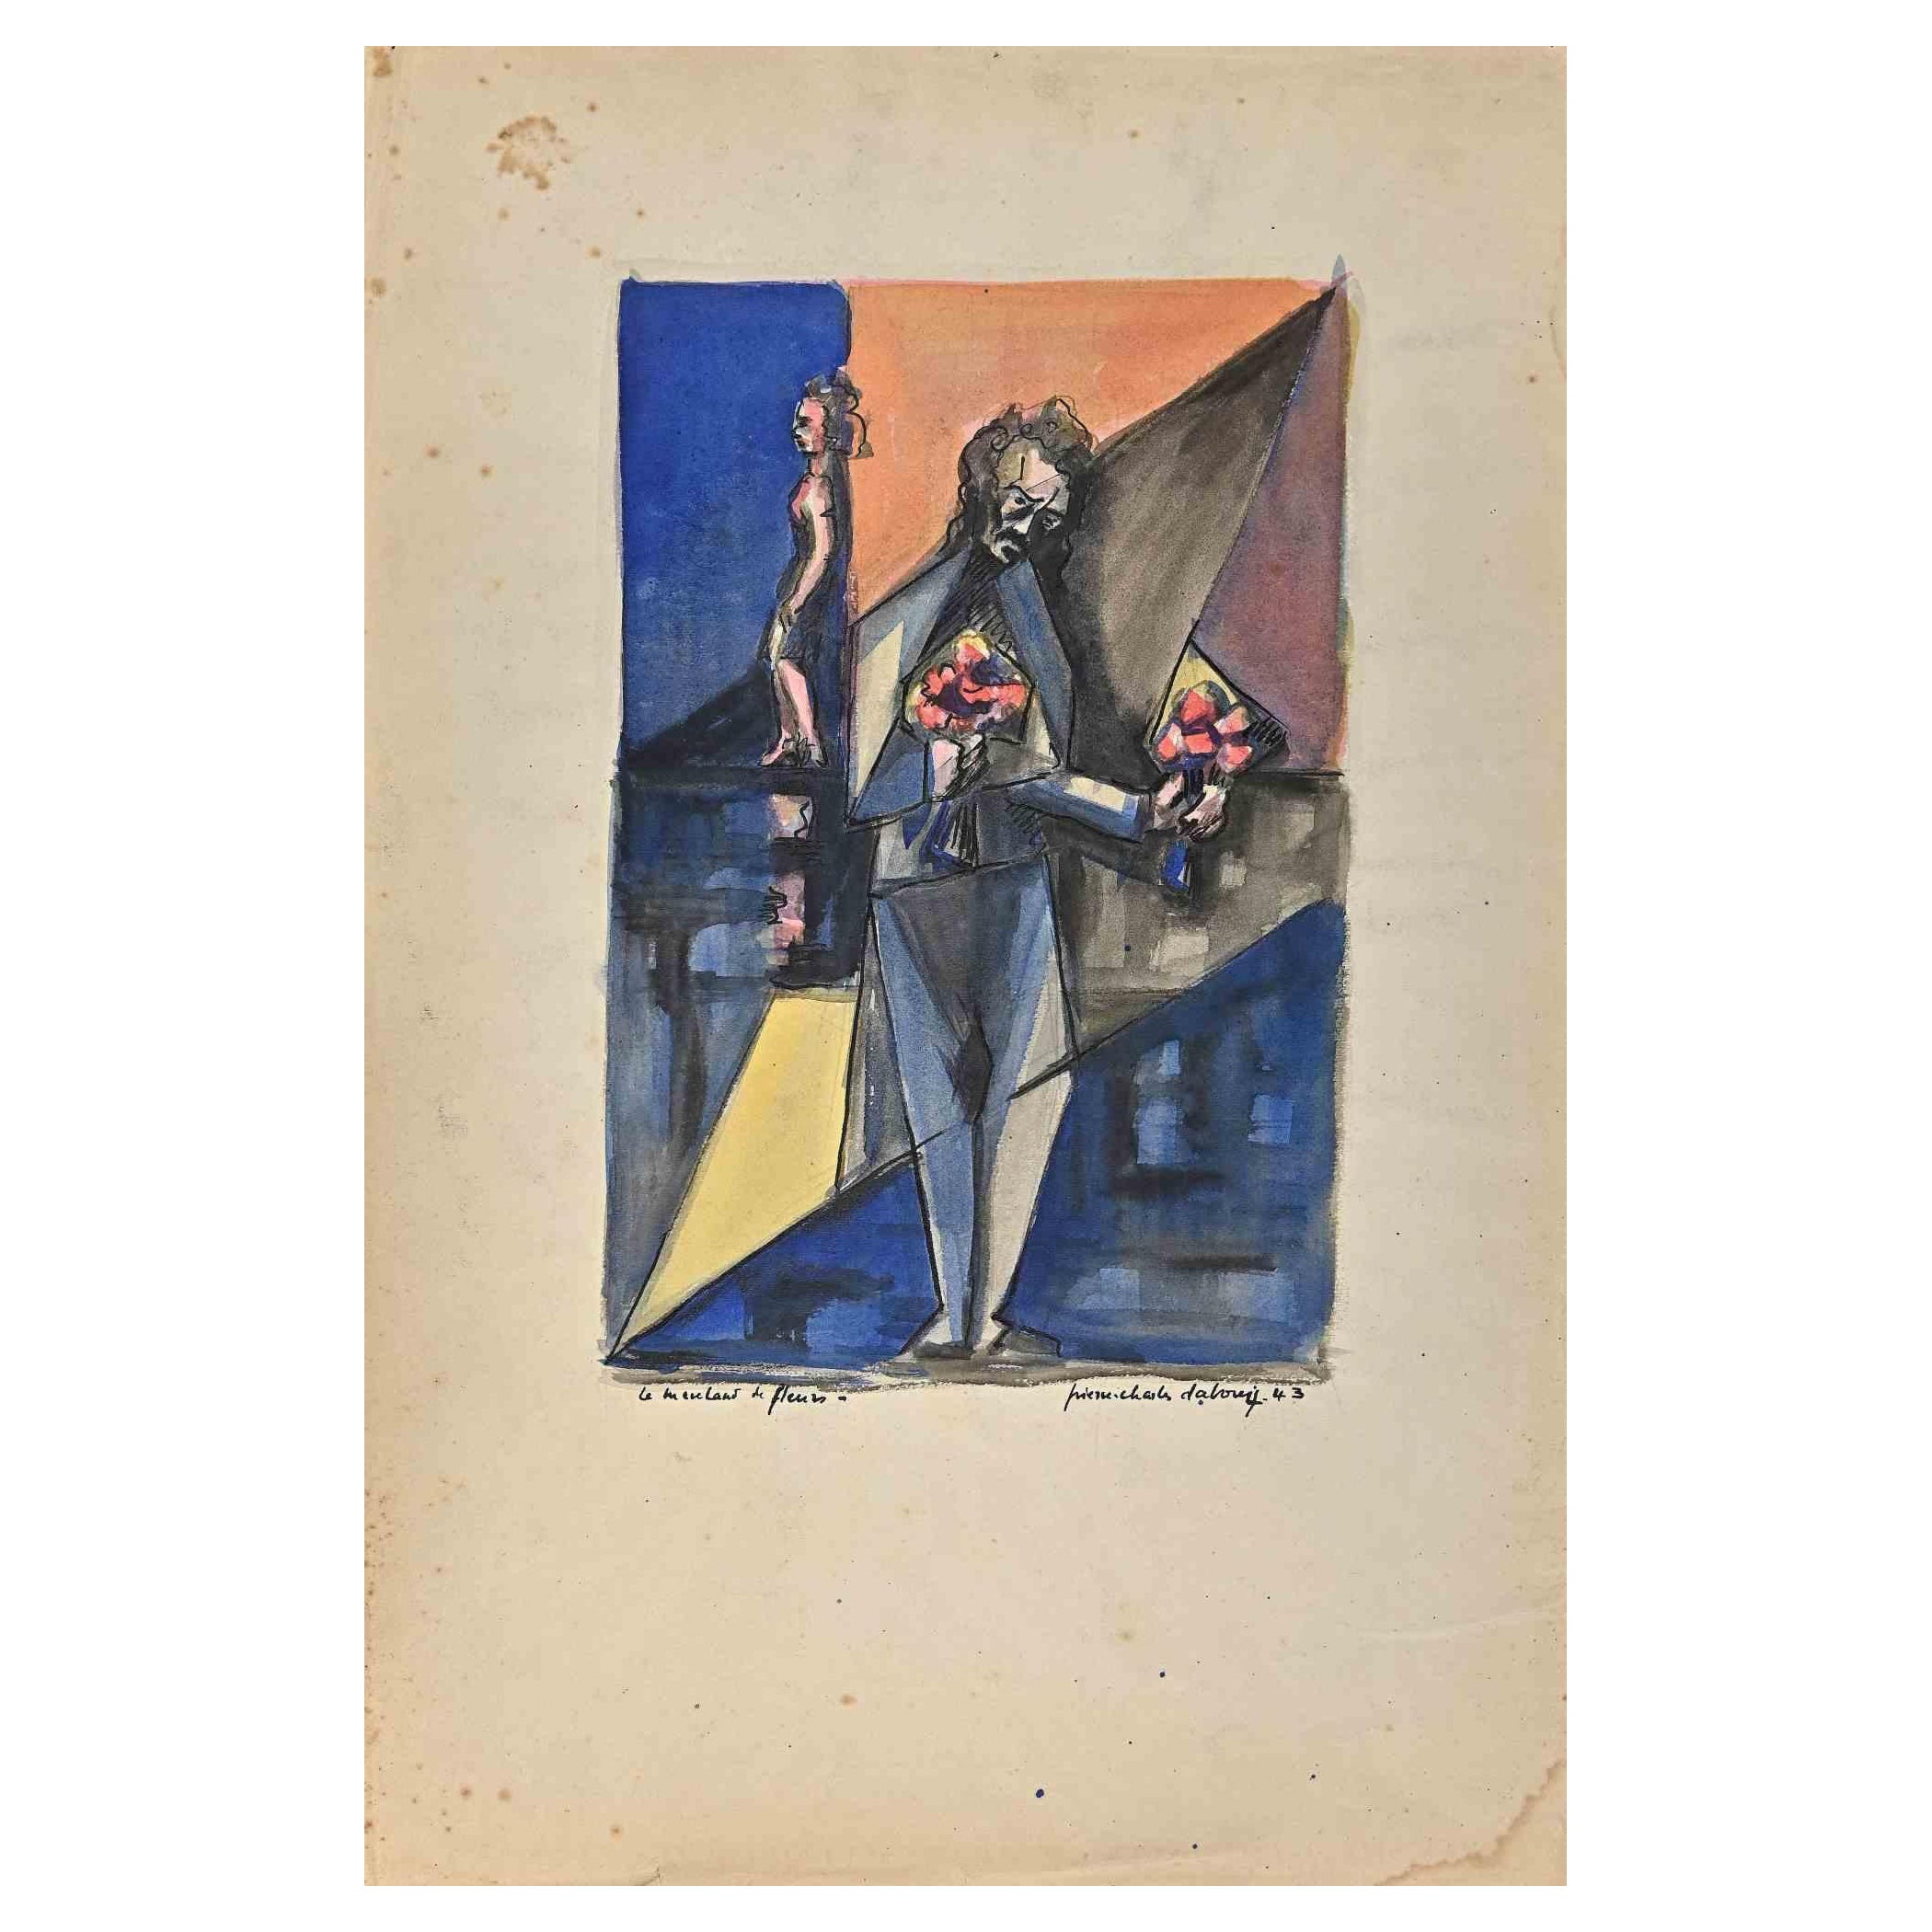 Figure is an original drawing in pen, tempera and watercolor realized by Pierre Charles Danobis in 1943.

Good Conditions.

The artwork is depicted through confident strokes in a well-balanced composition.